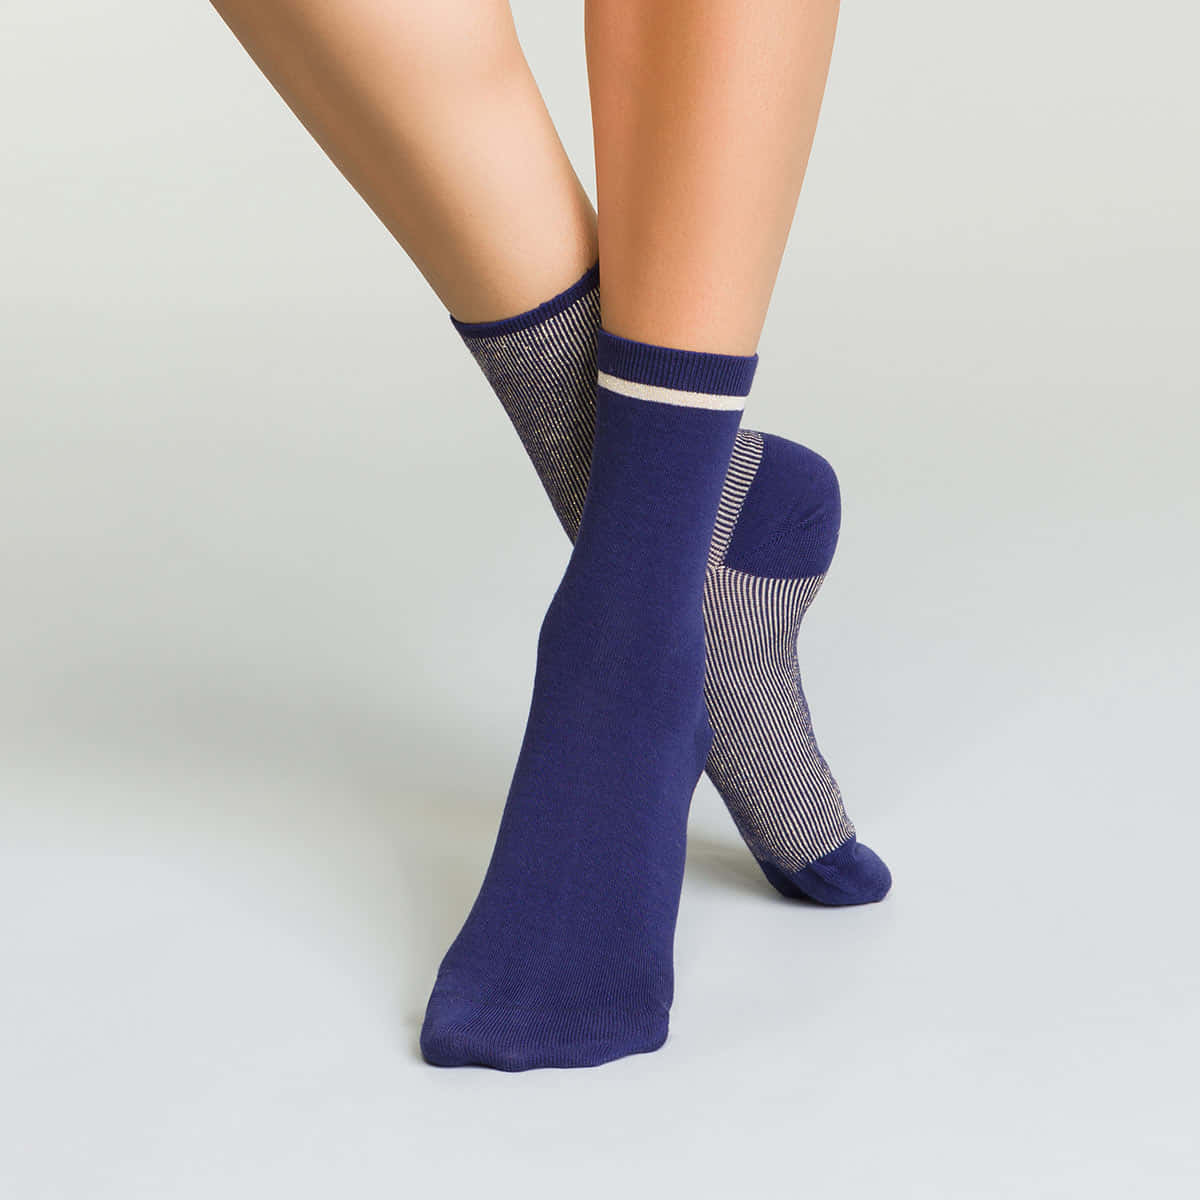 Show off Your Style With Purple Socks" Wallpaper